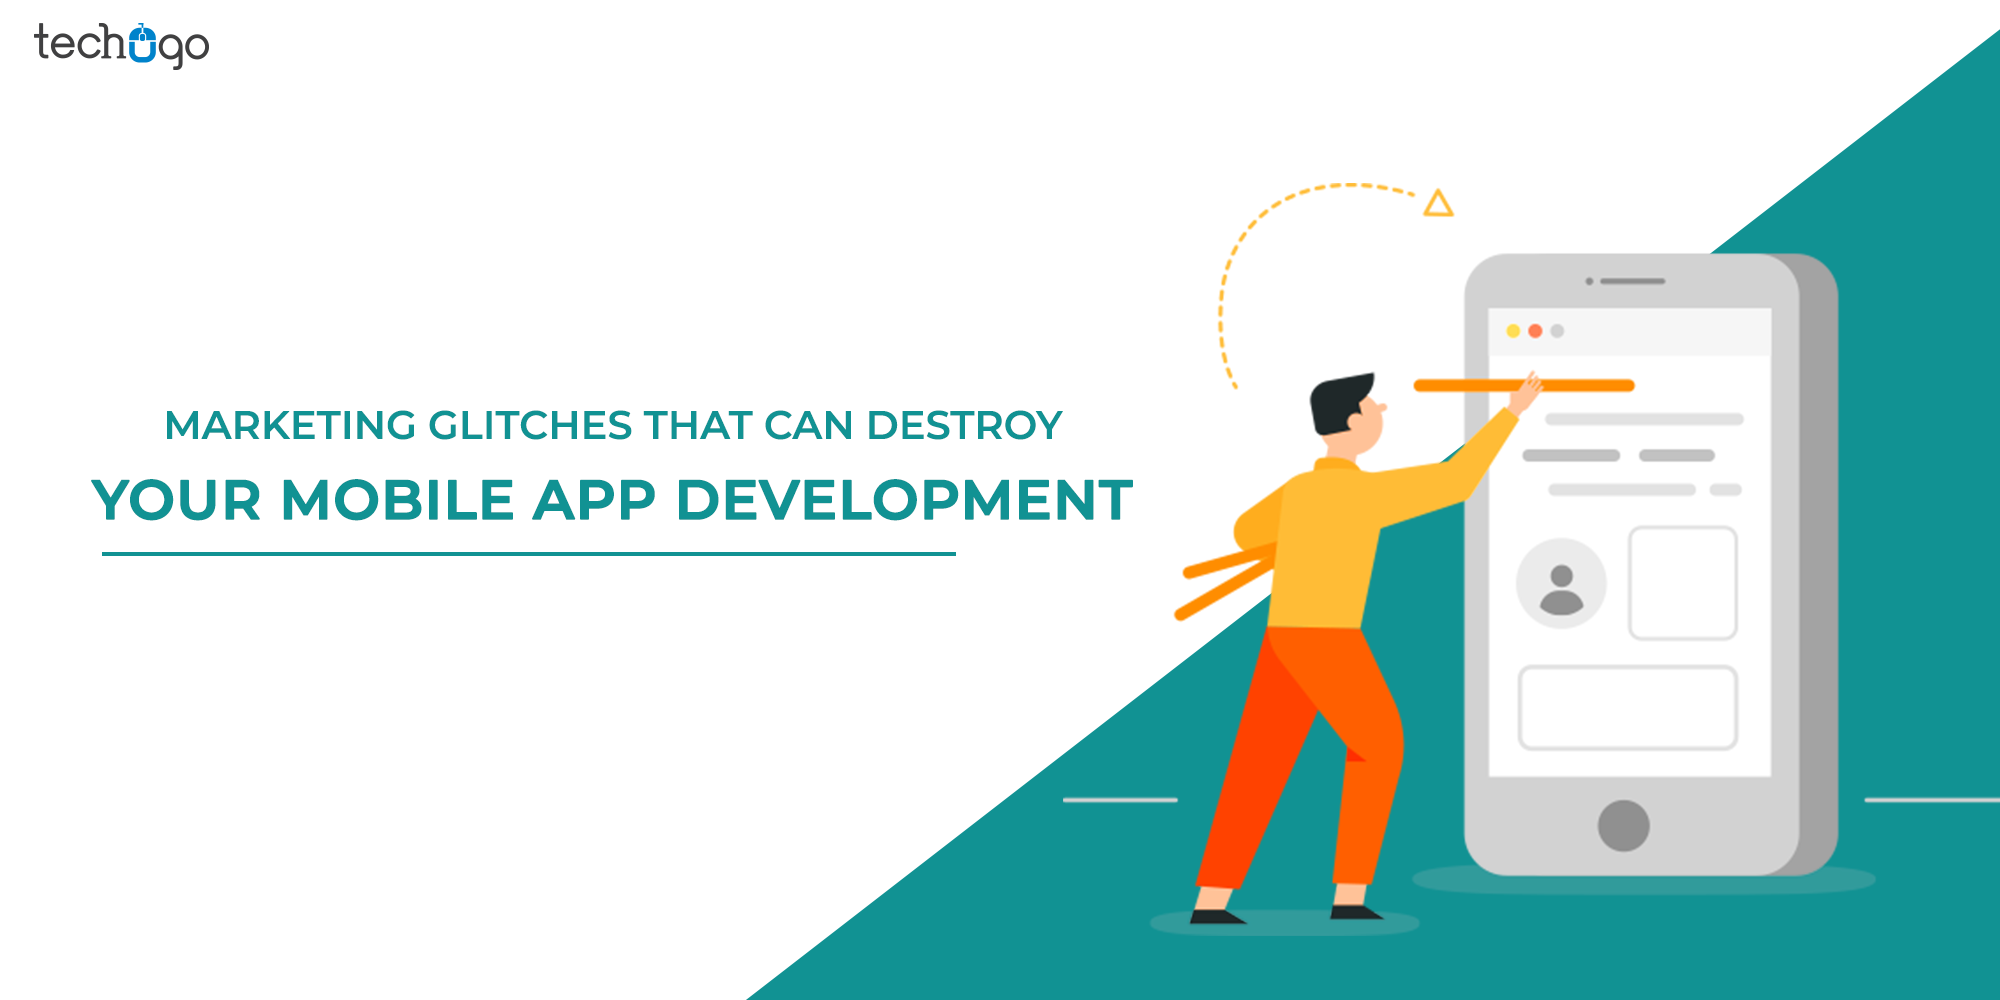 Marketing Glitches That Can Destroy Your Mobile App Development